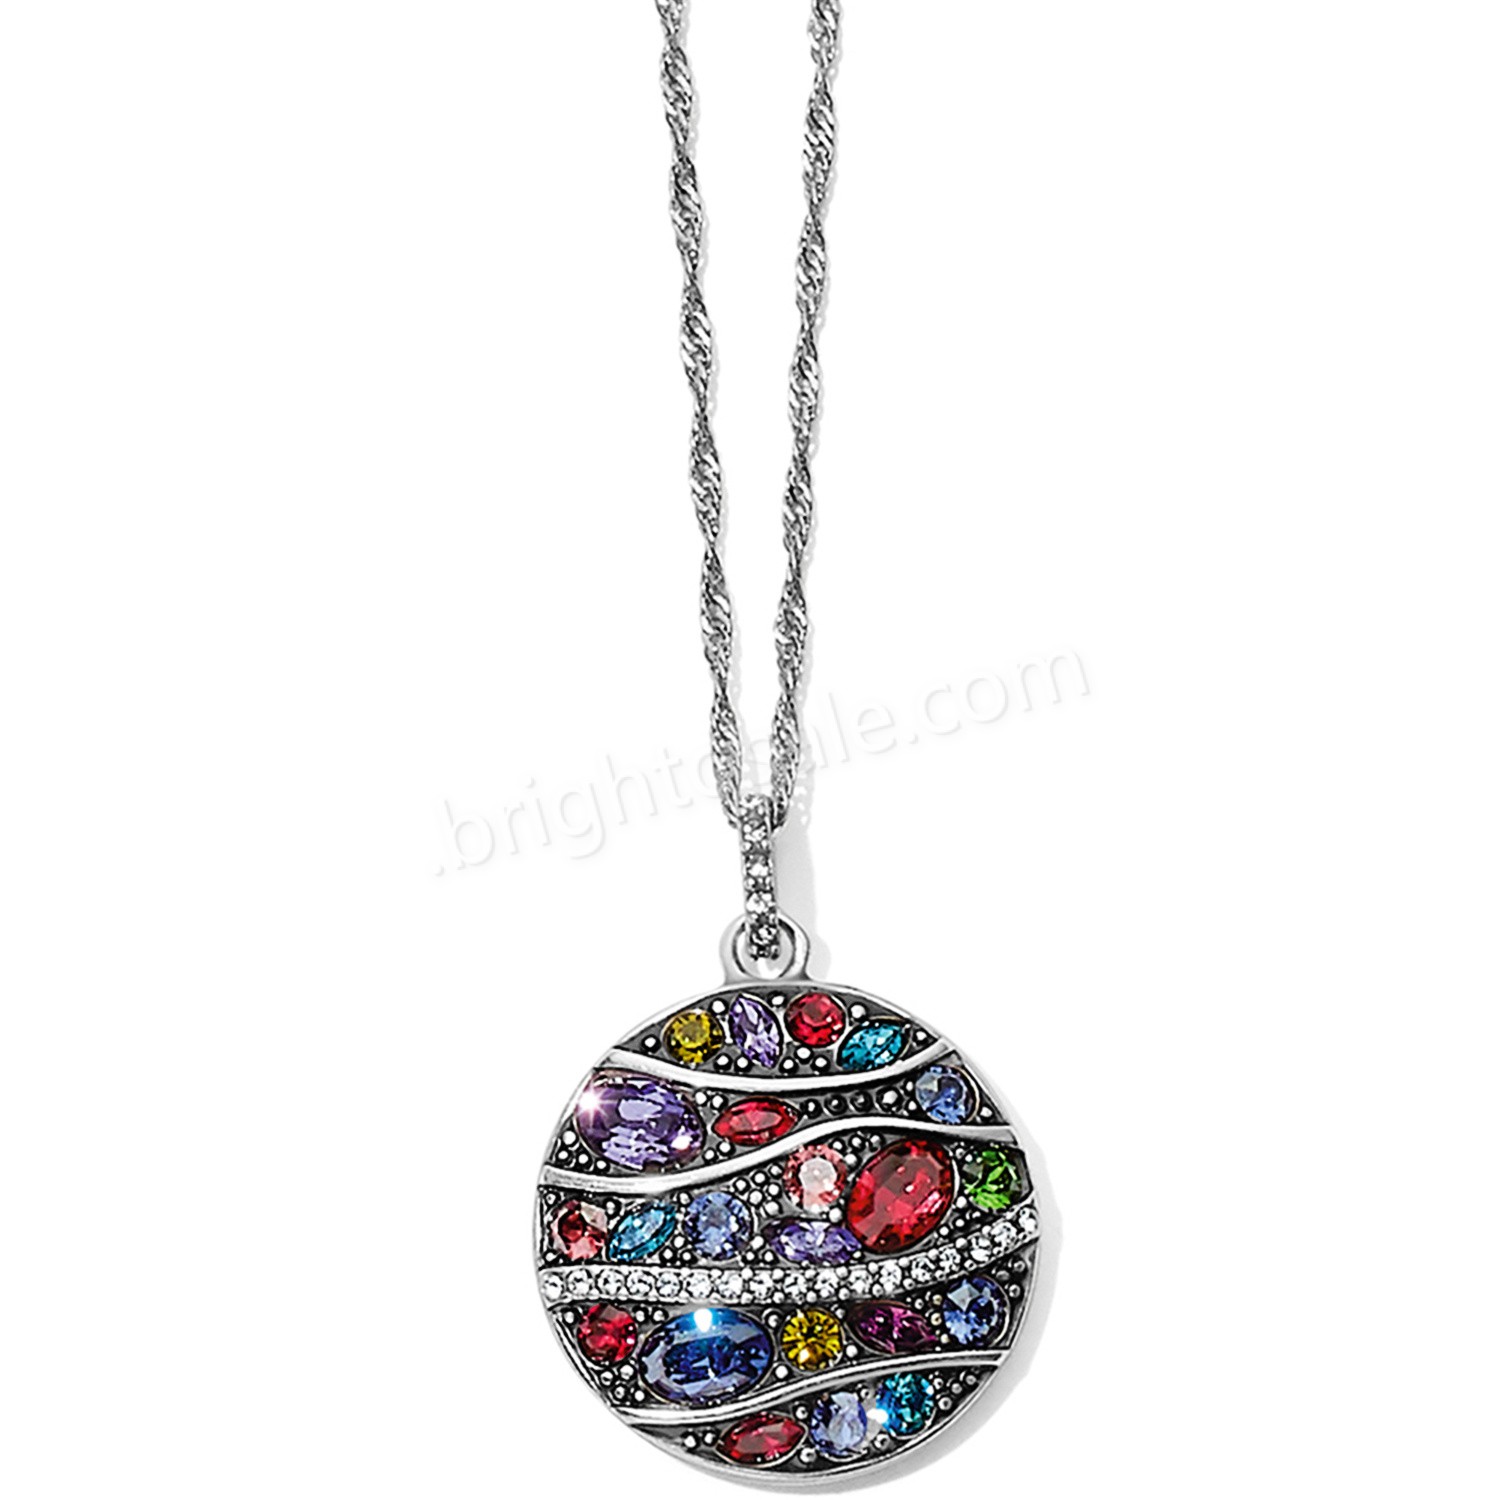 Brighton Collectibles & Online Discount Trust Your Journey Lady Bug Reversible Necklace - Brighton Collectibles & Online Discount Trust Your Journey Lady Bug Reversible Necklace